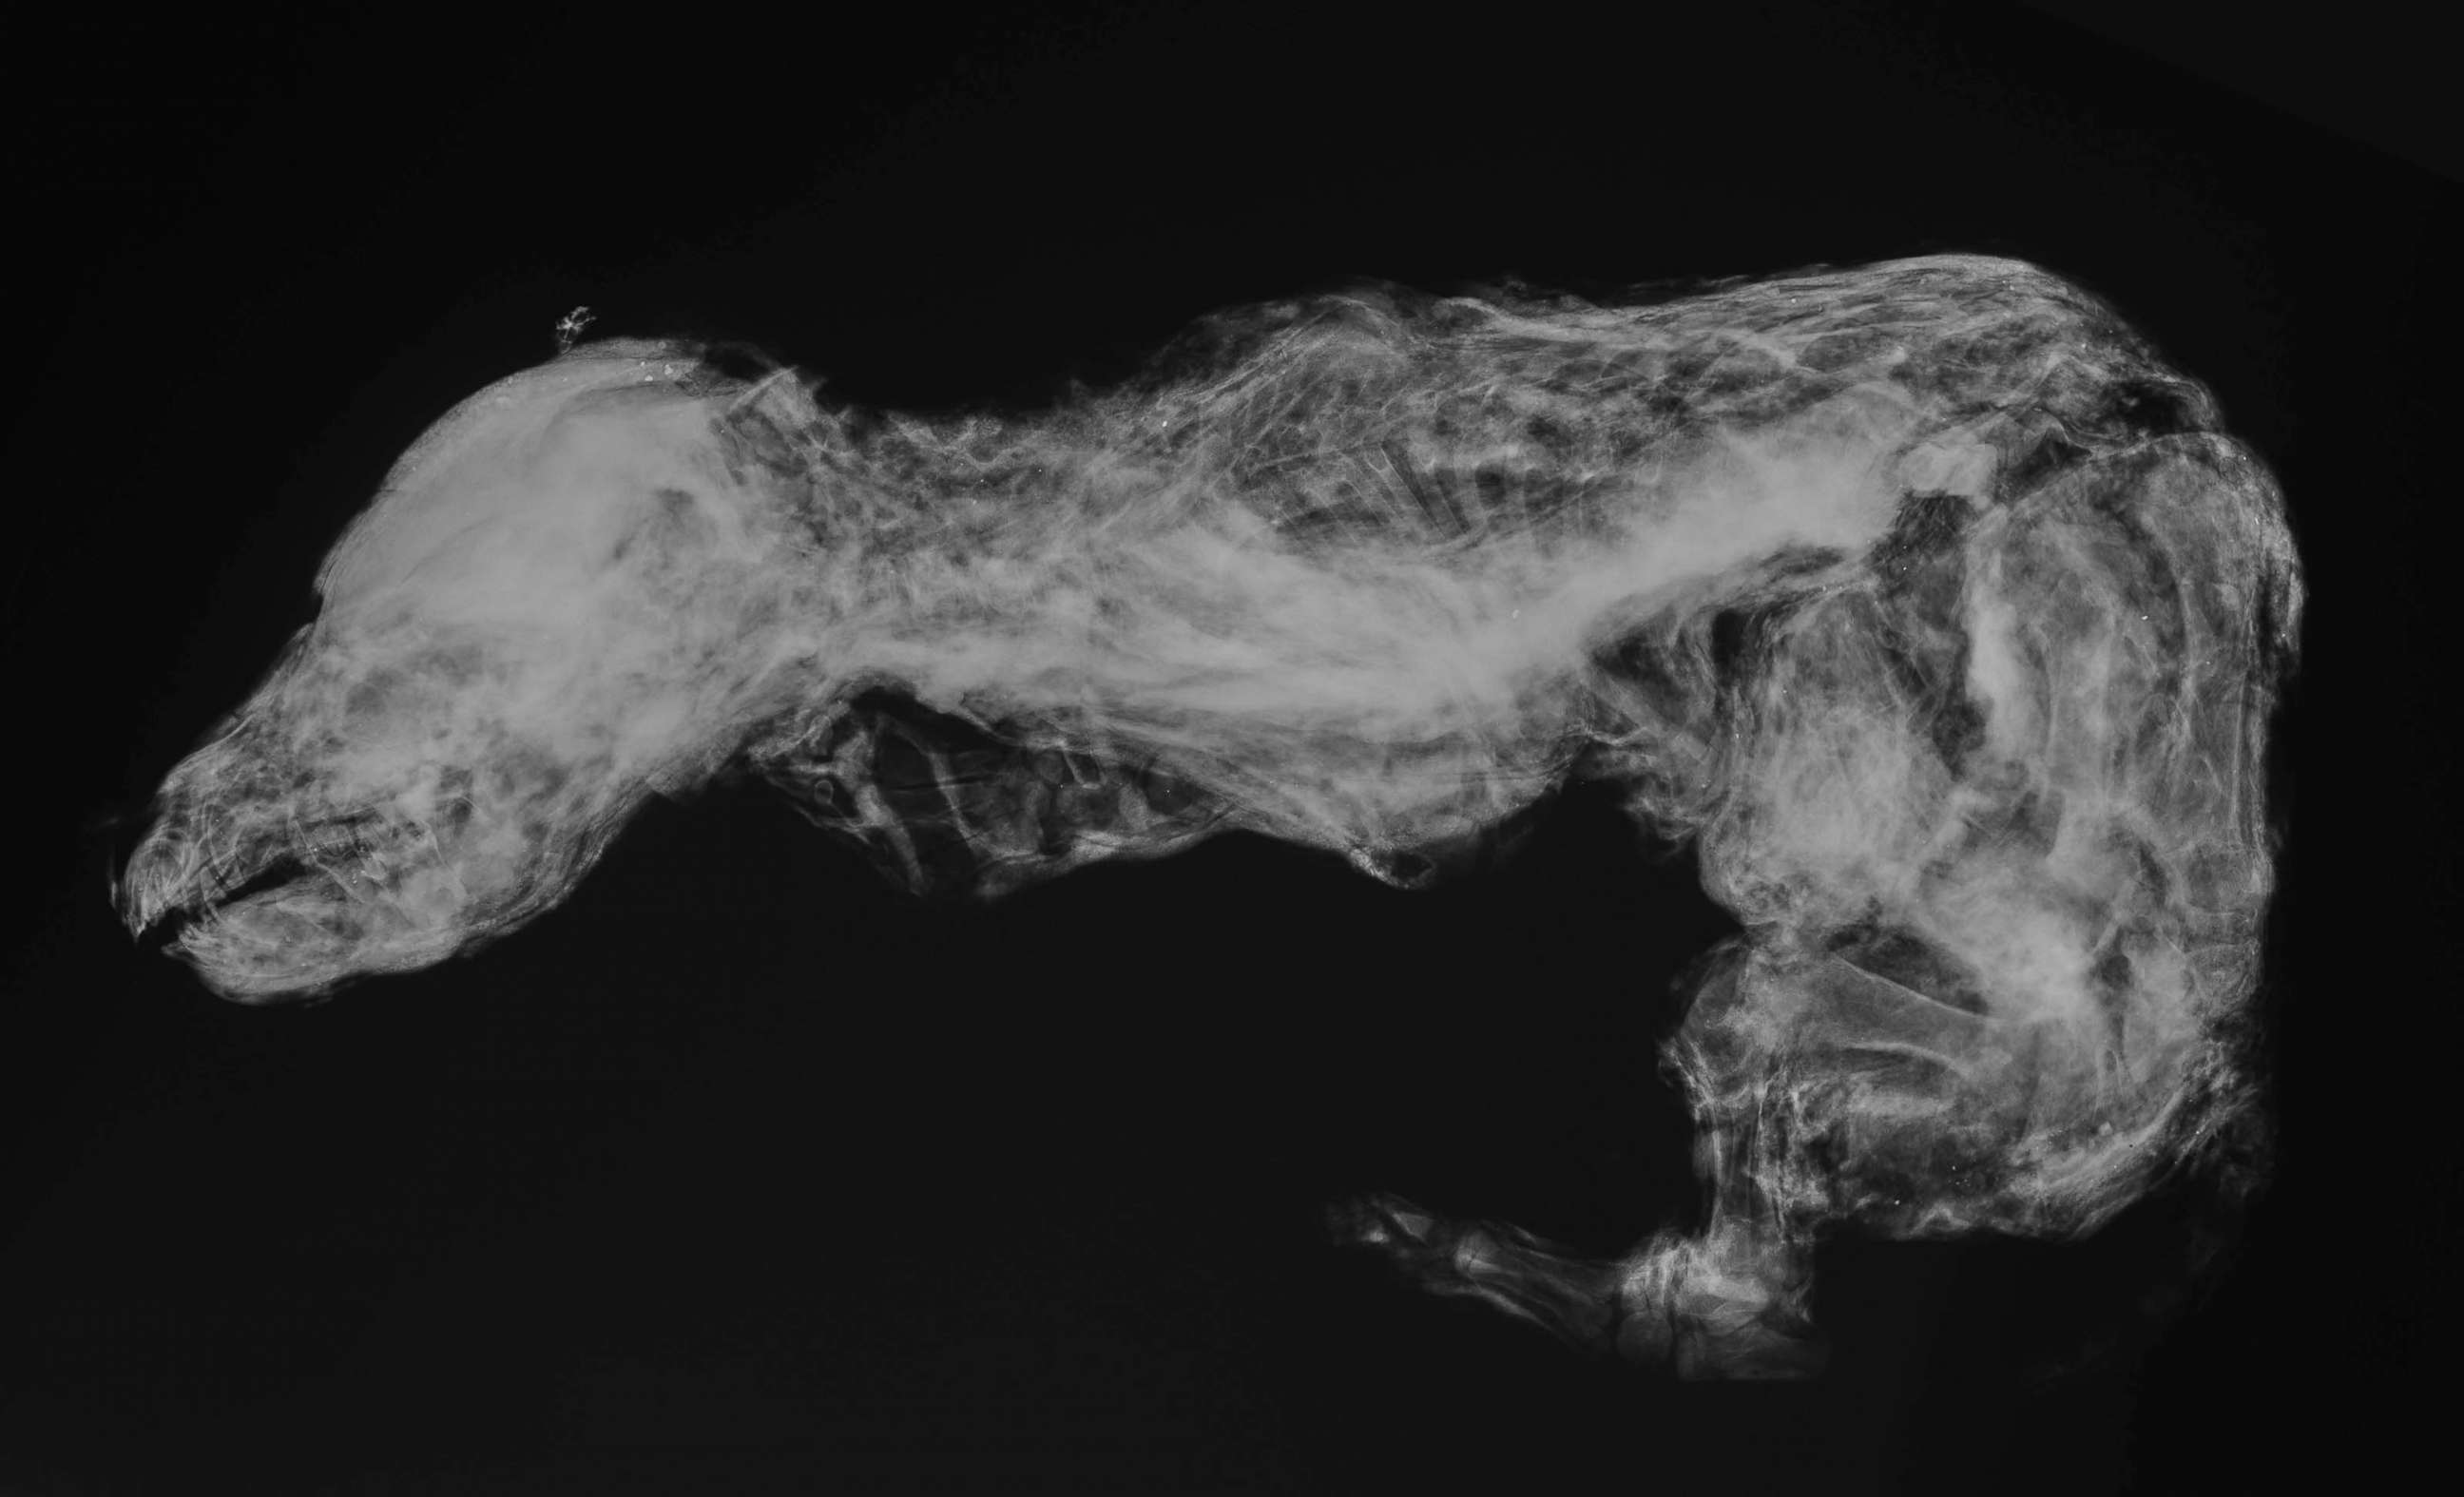 PHOTO: An x-ray view of an ancient wolf pup uncovered in Yukon permafrost.